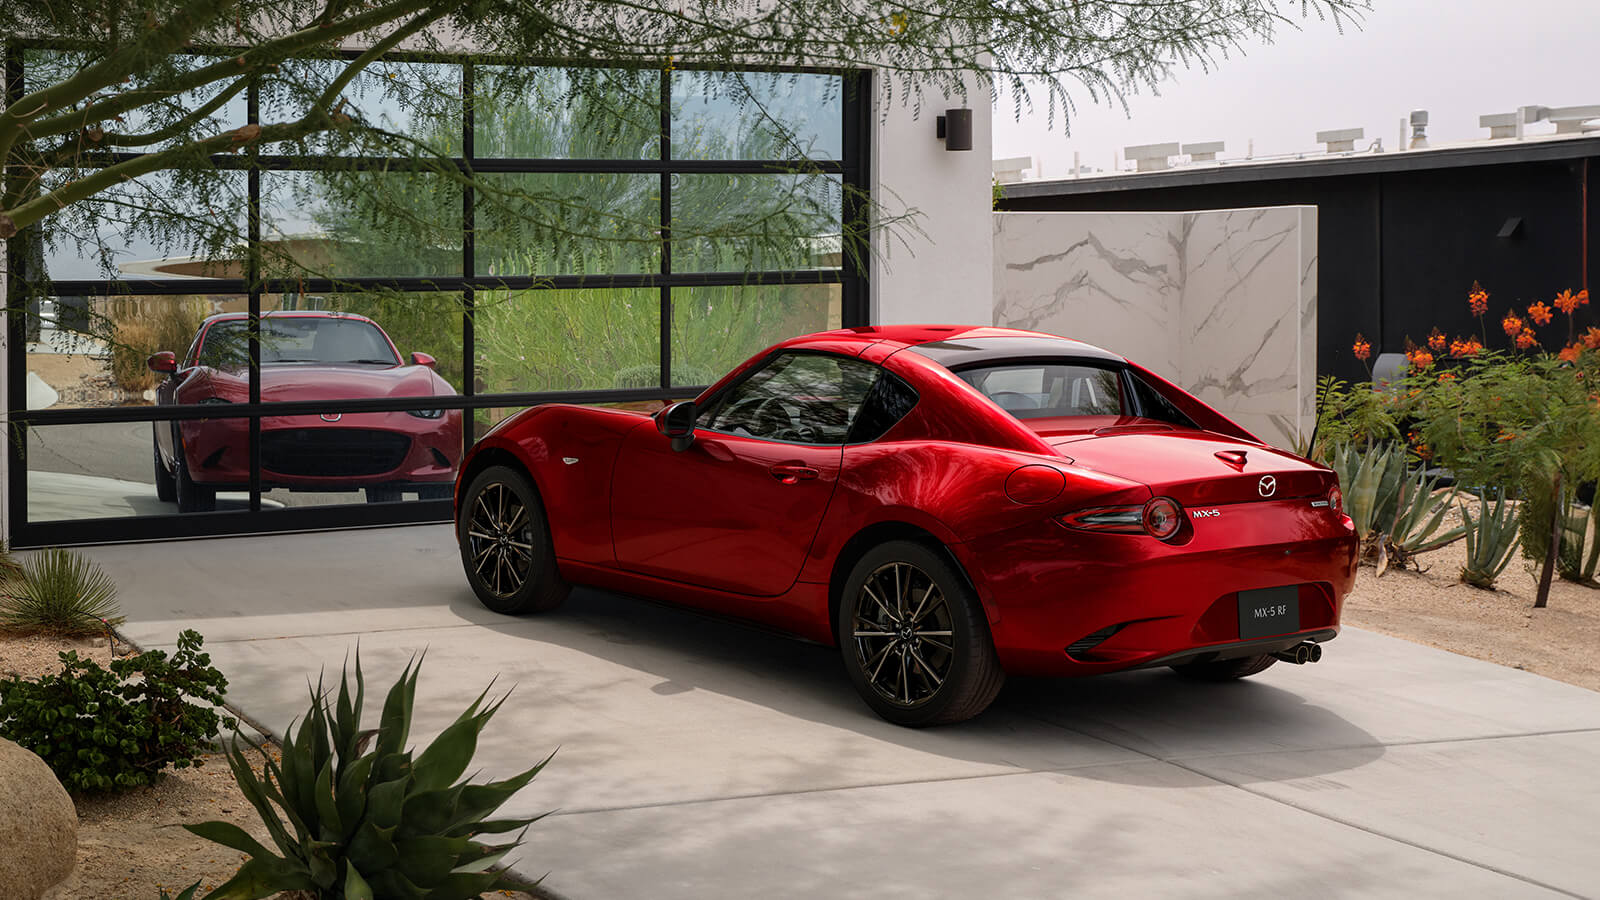 Soul Red Crystal Metallic MX-5 RF parked in front of a reflecting garage, showcasing its sleek design on a driveway.